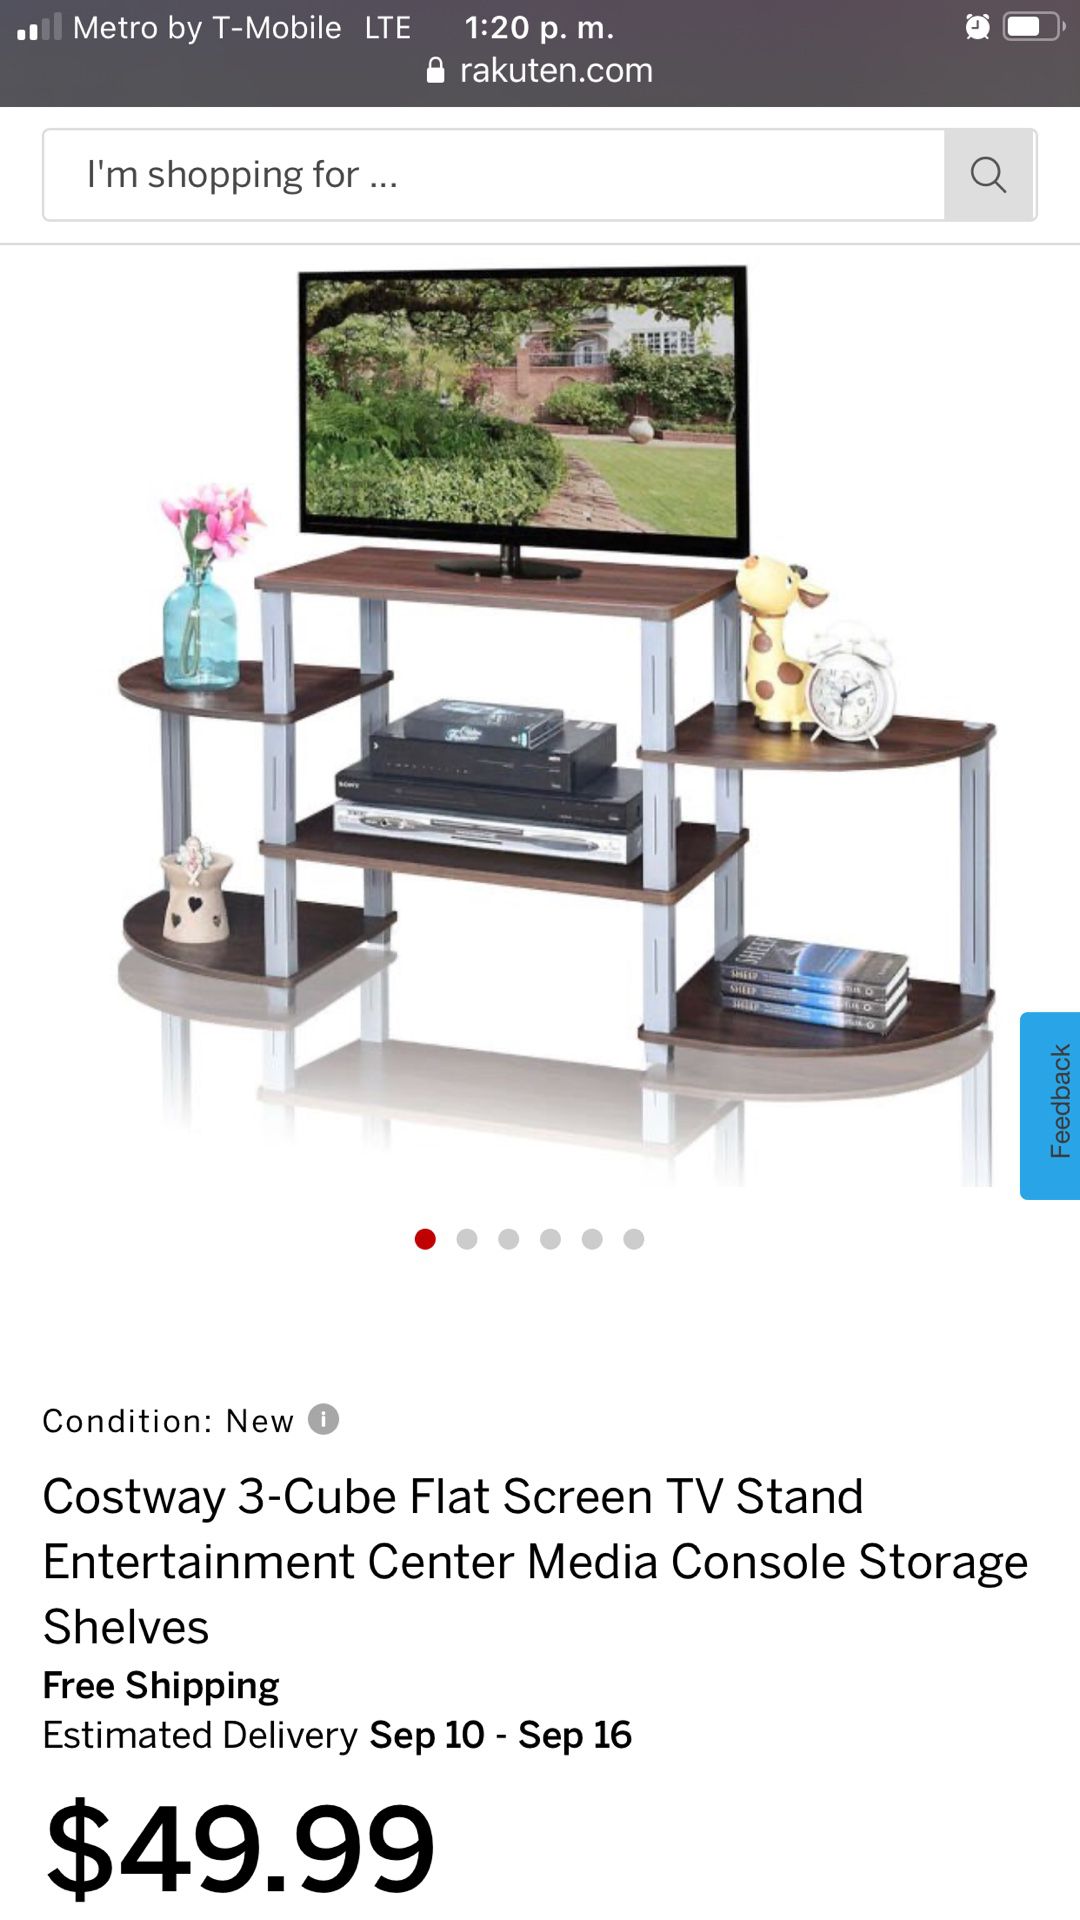 Costway 3-Cube Flat Screen TV Stand Entertainment Center Media Console Storage Shelves